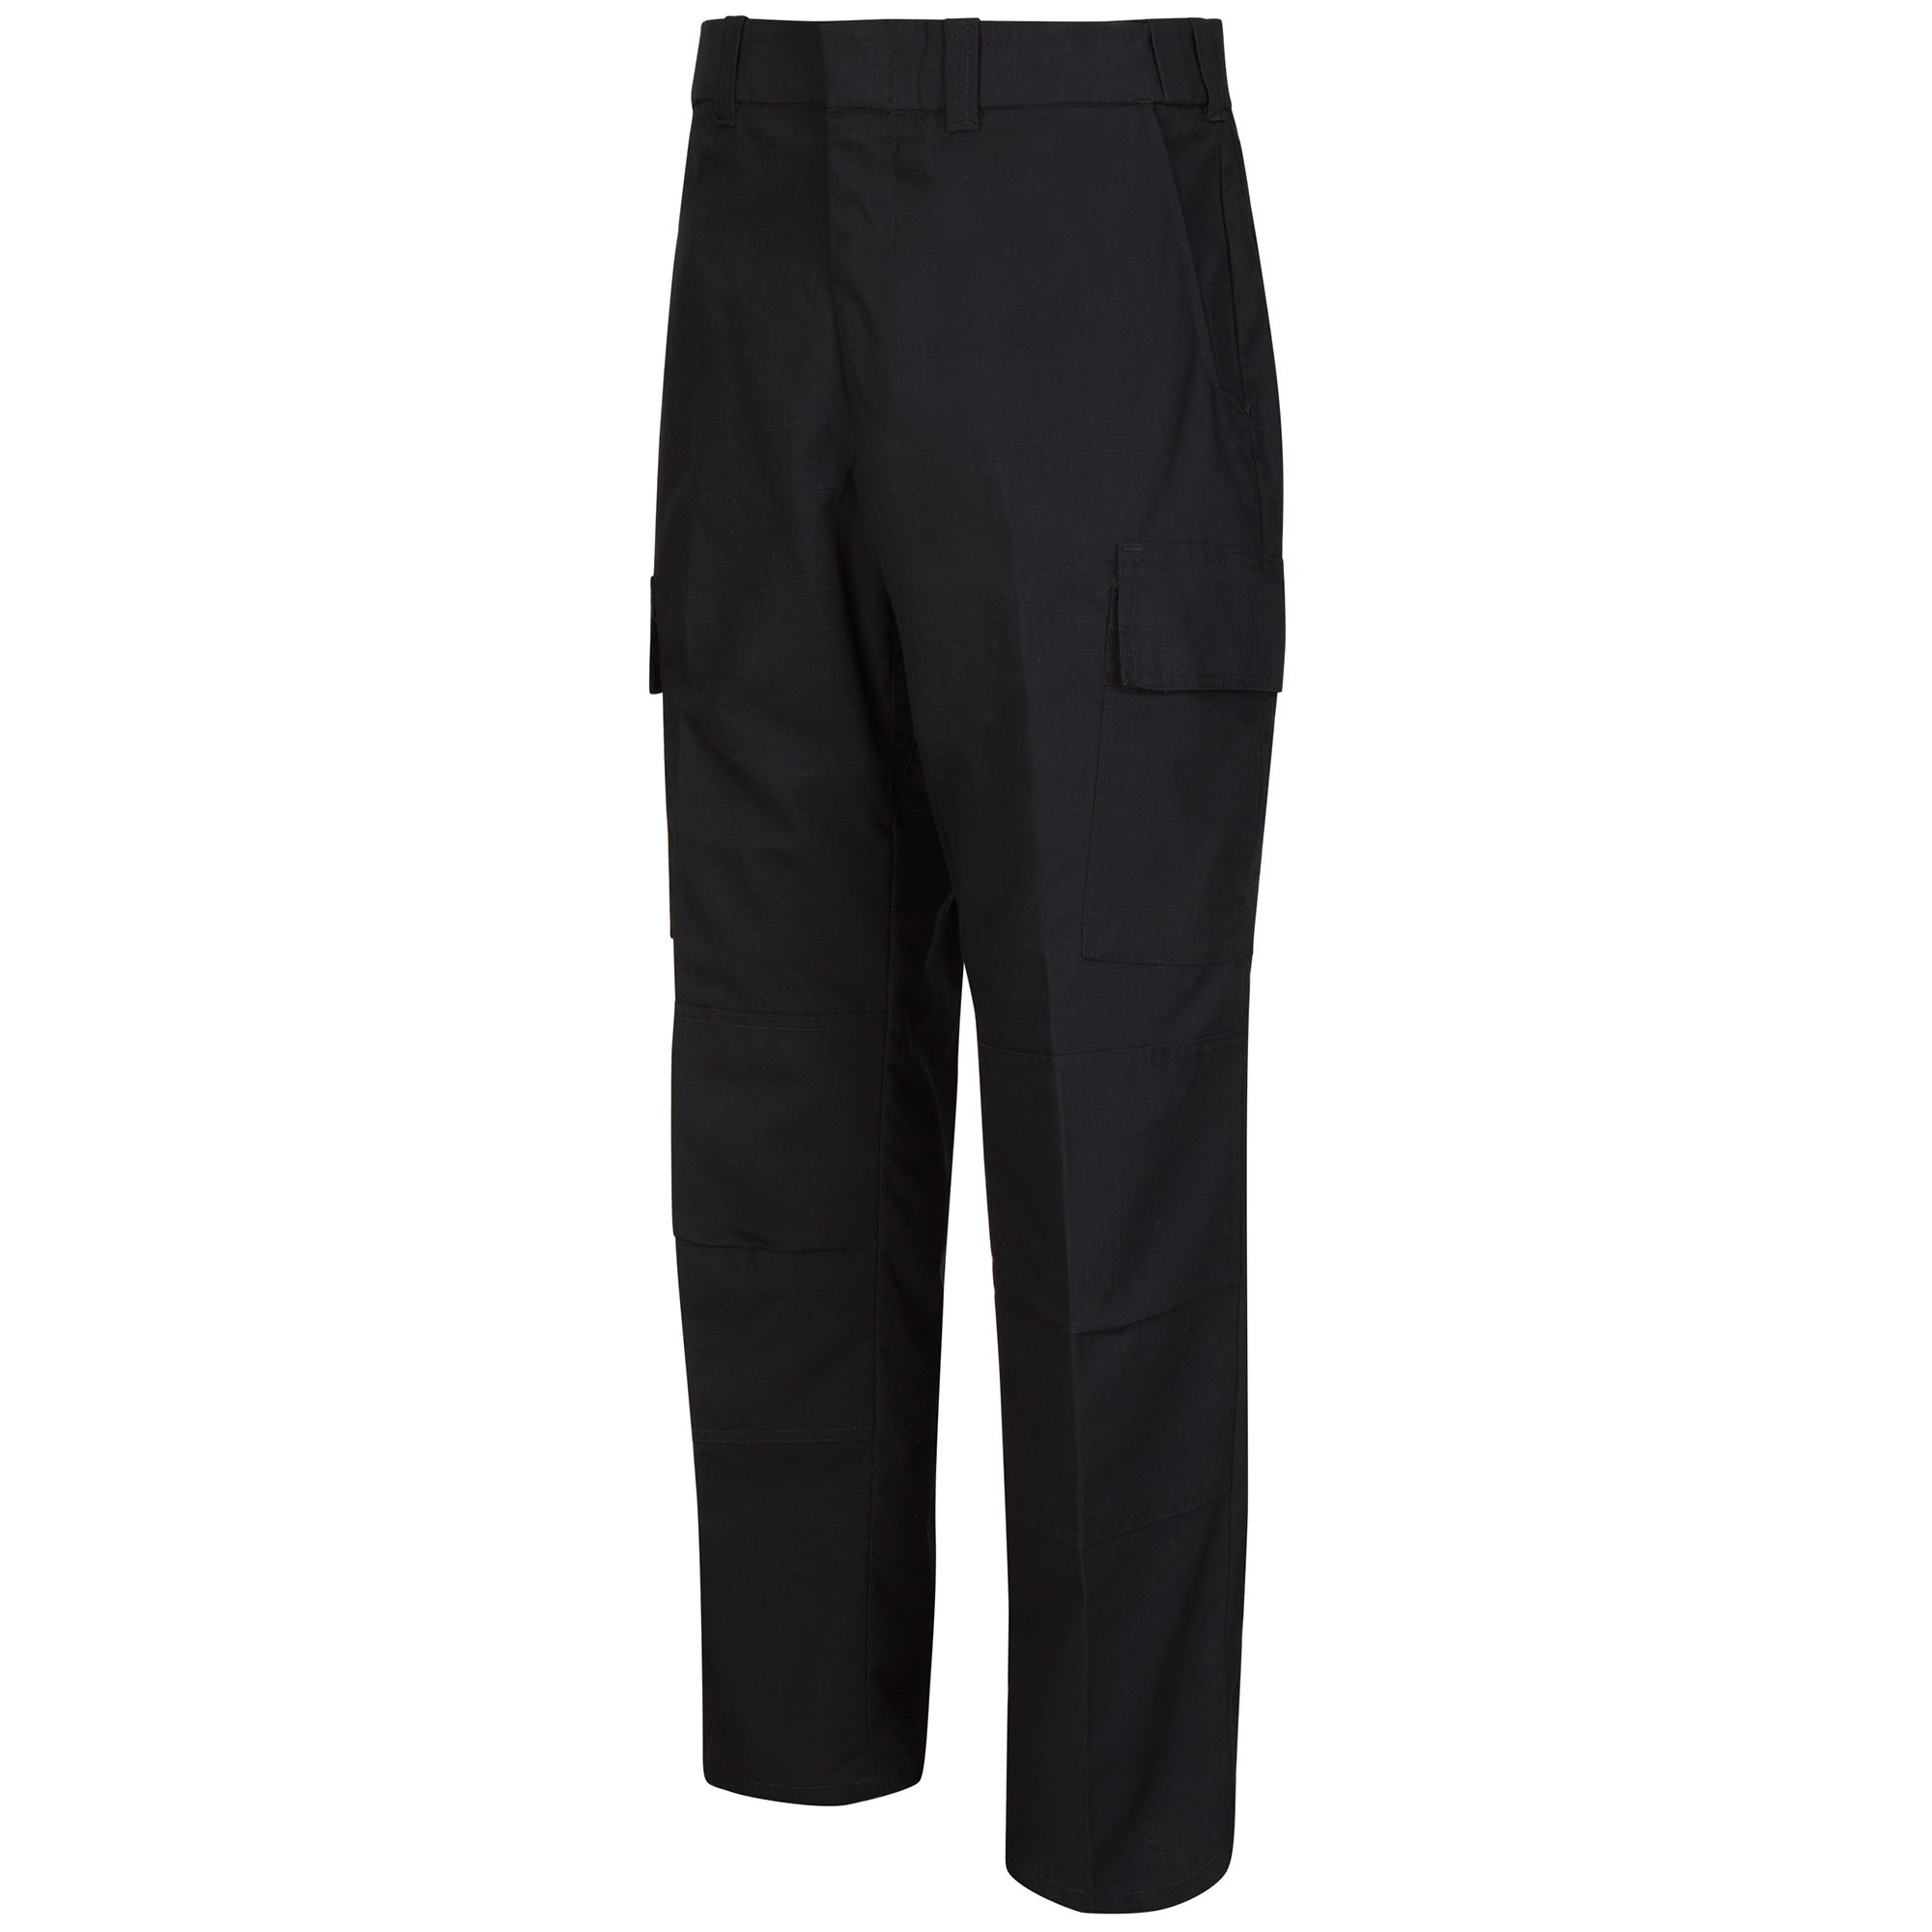 Horace Small HS2746 Men's New Dimension Plus Ripstop Cargo Trousers ...